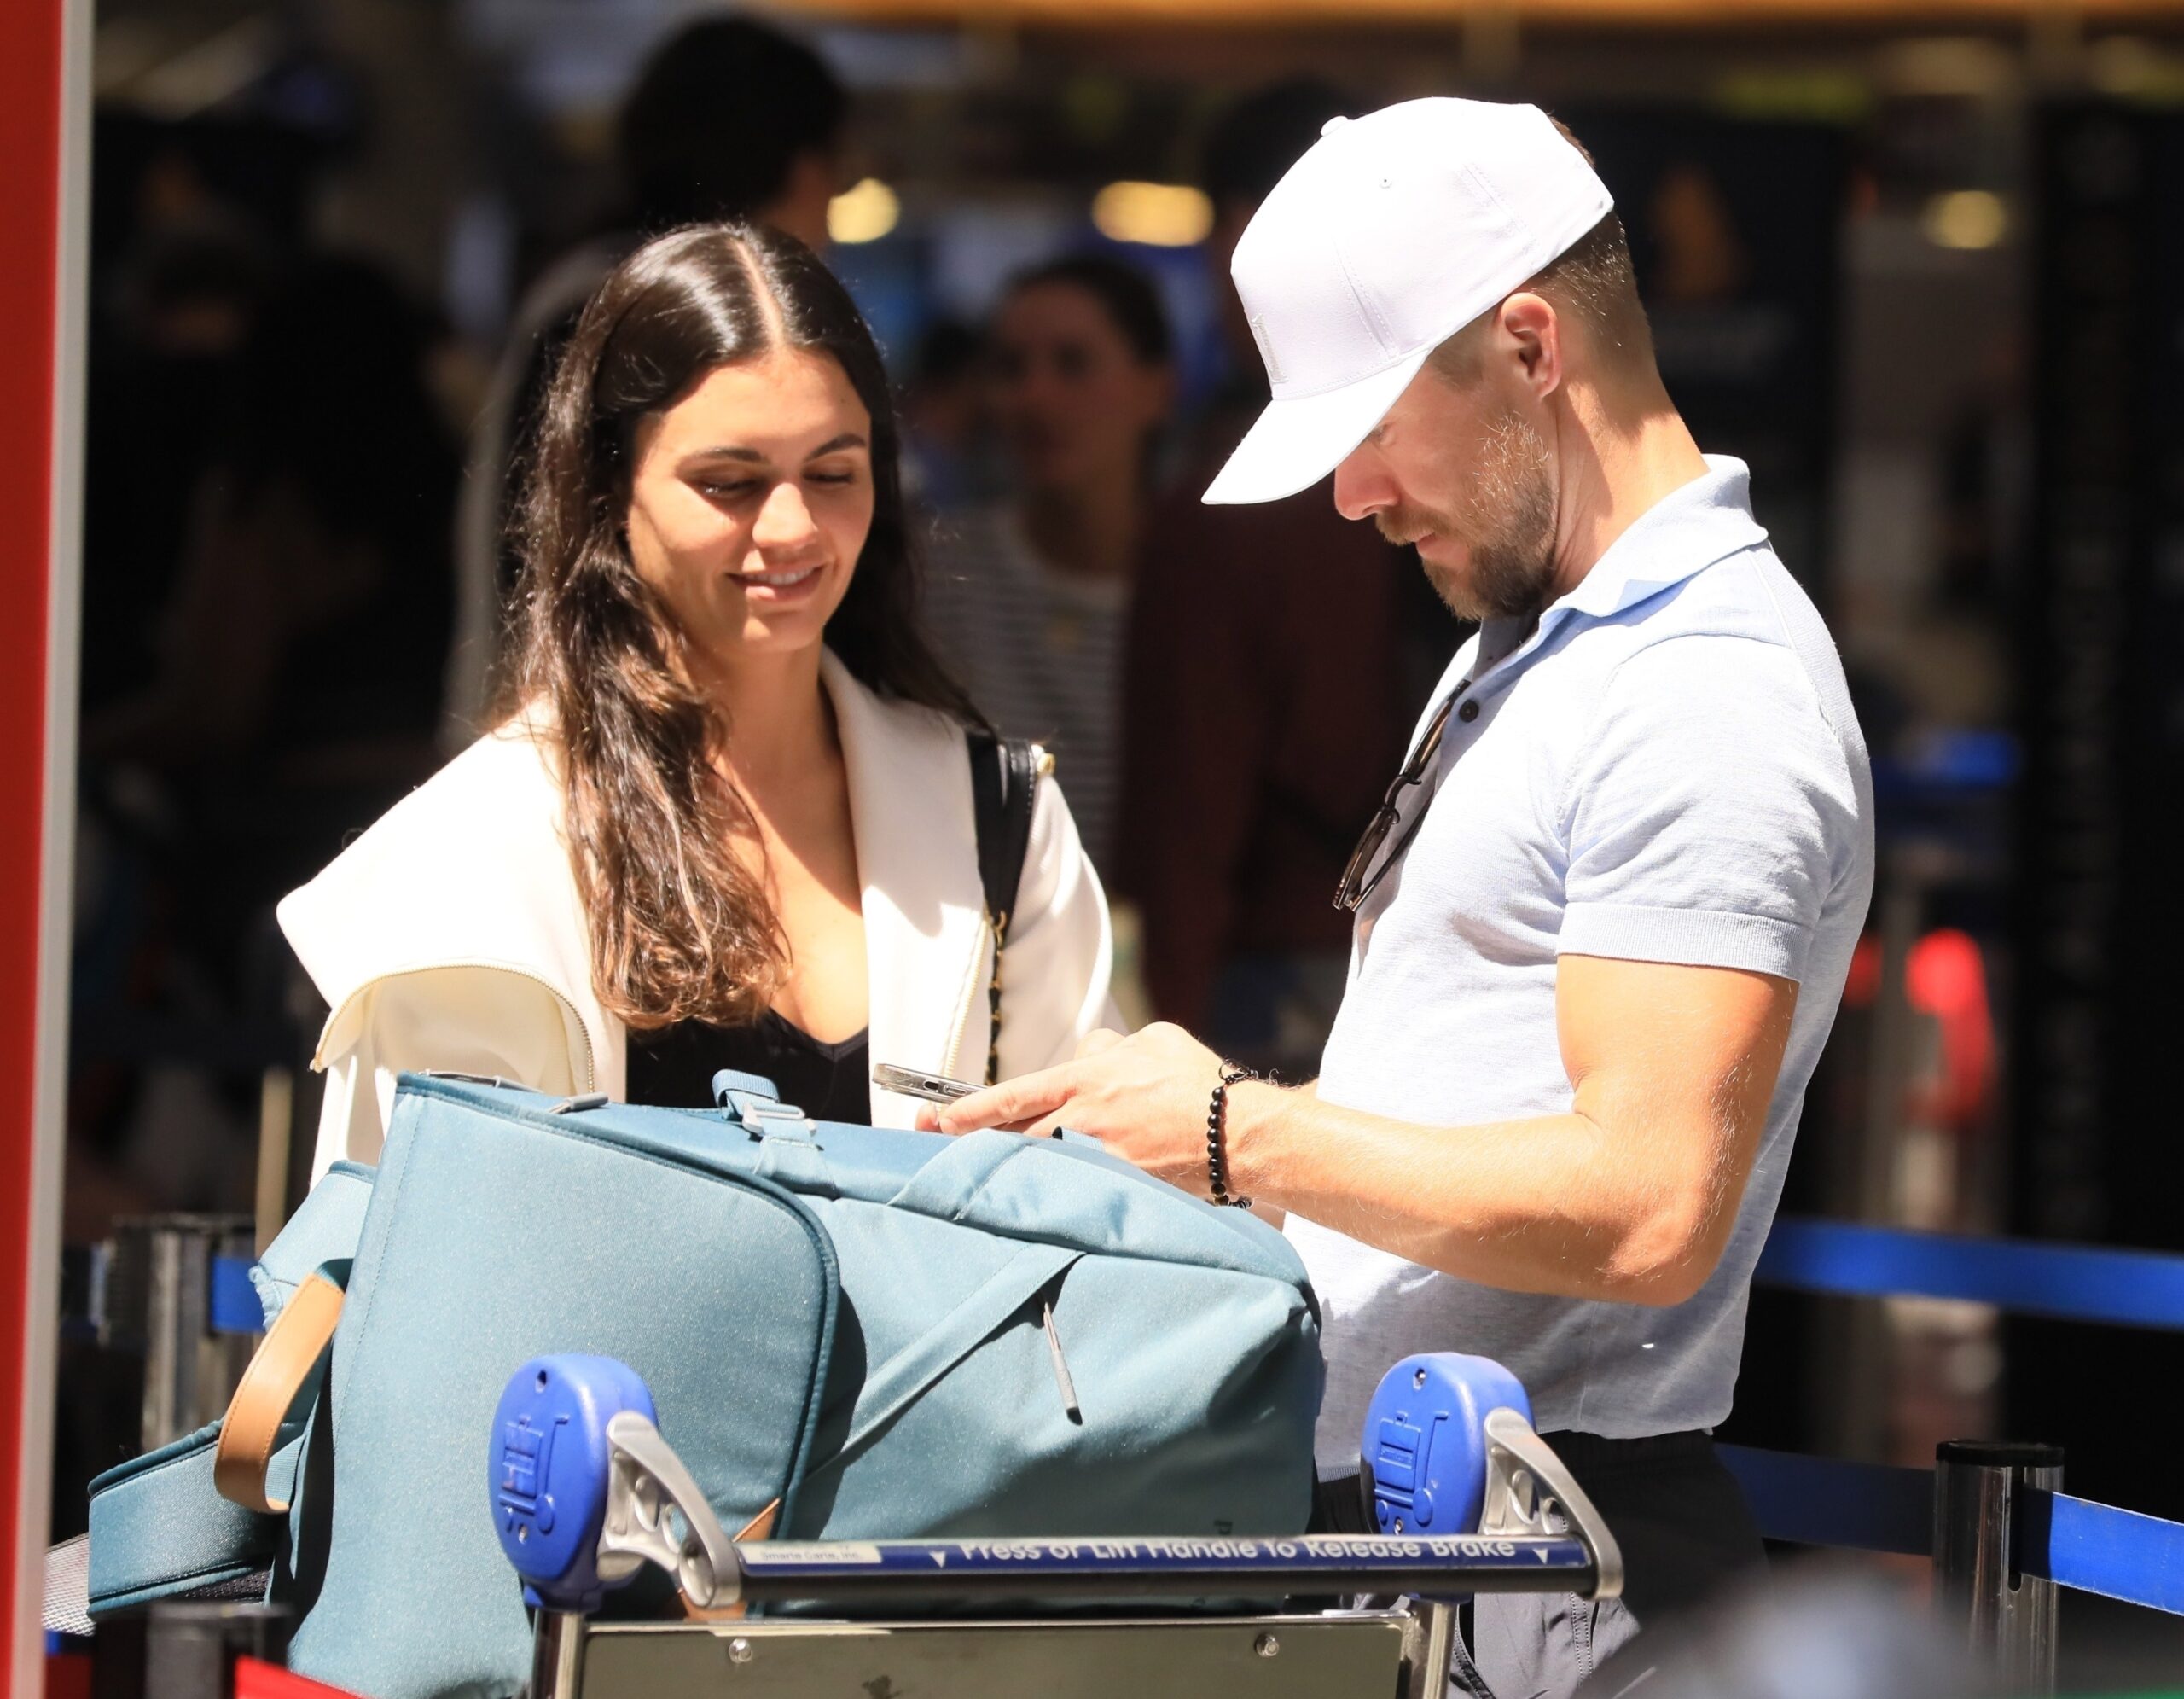 Newlyweds Derek Hough and Hayley Erbert pack on the PDA at LAX following fairy-tale wedding